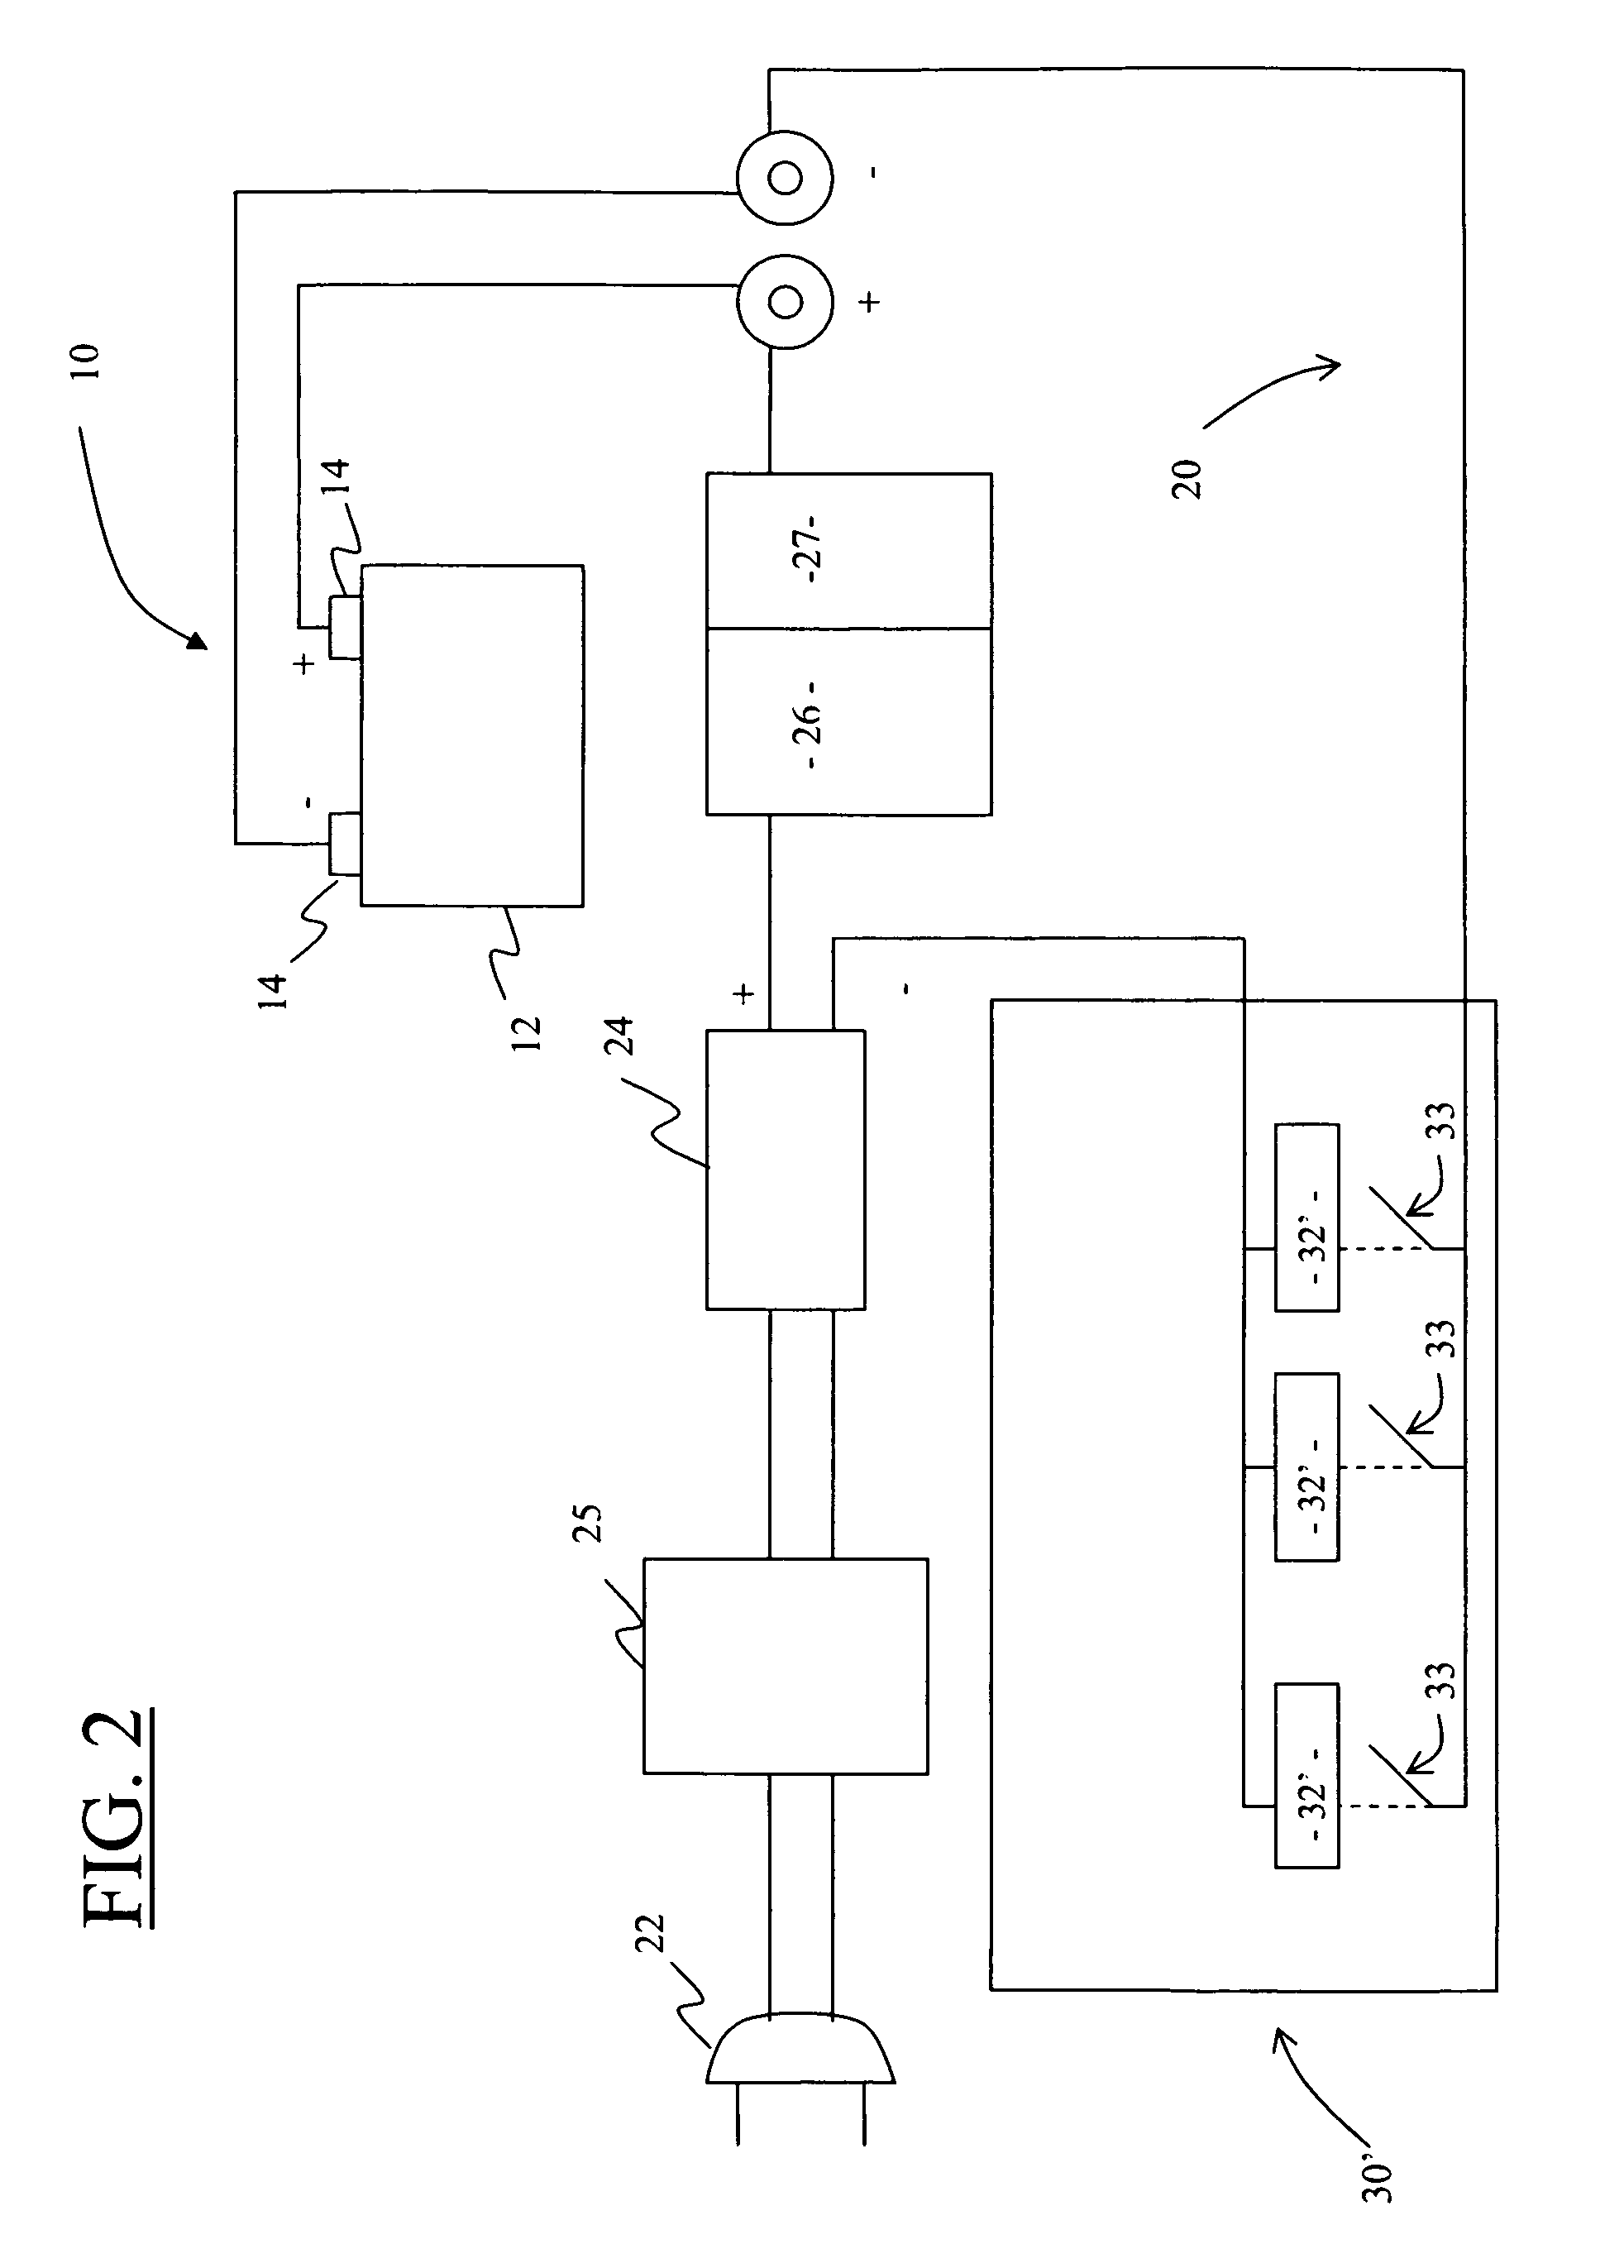 Load controlled battery charging device